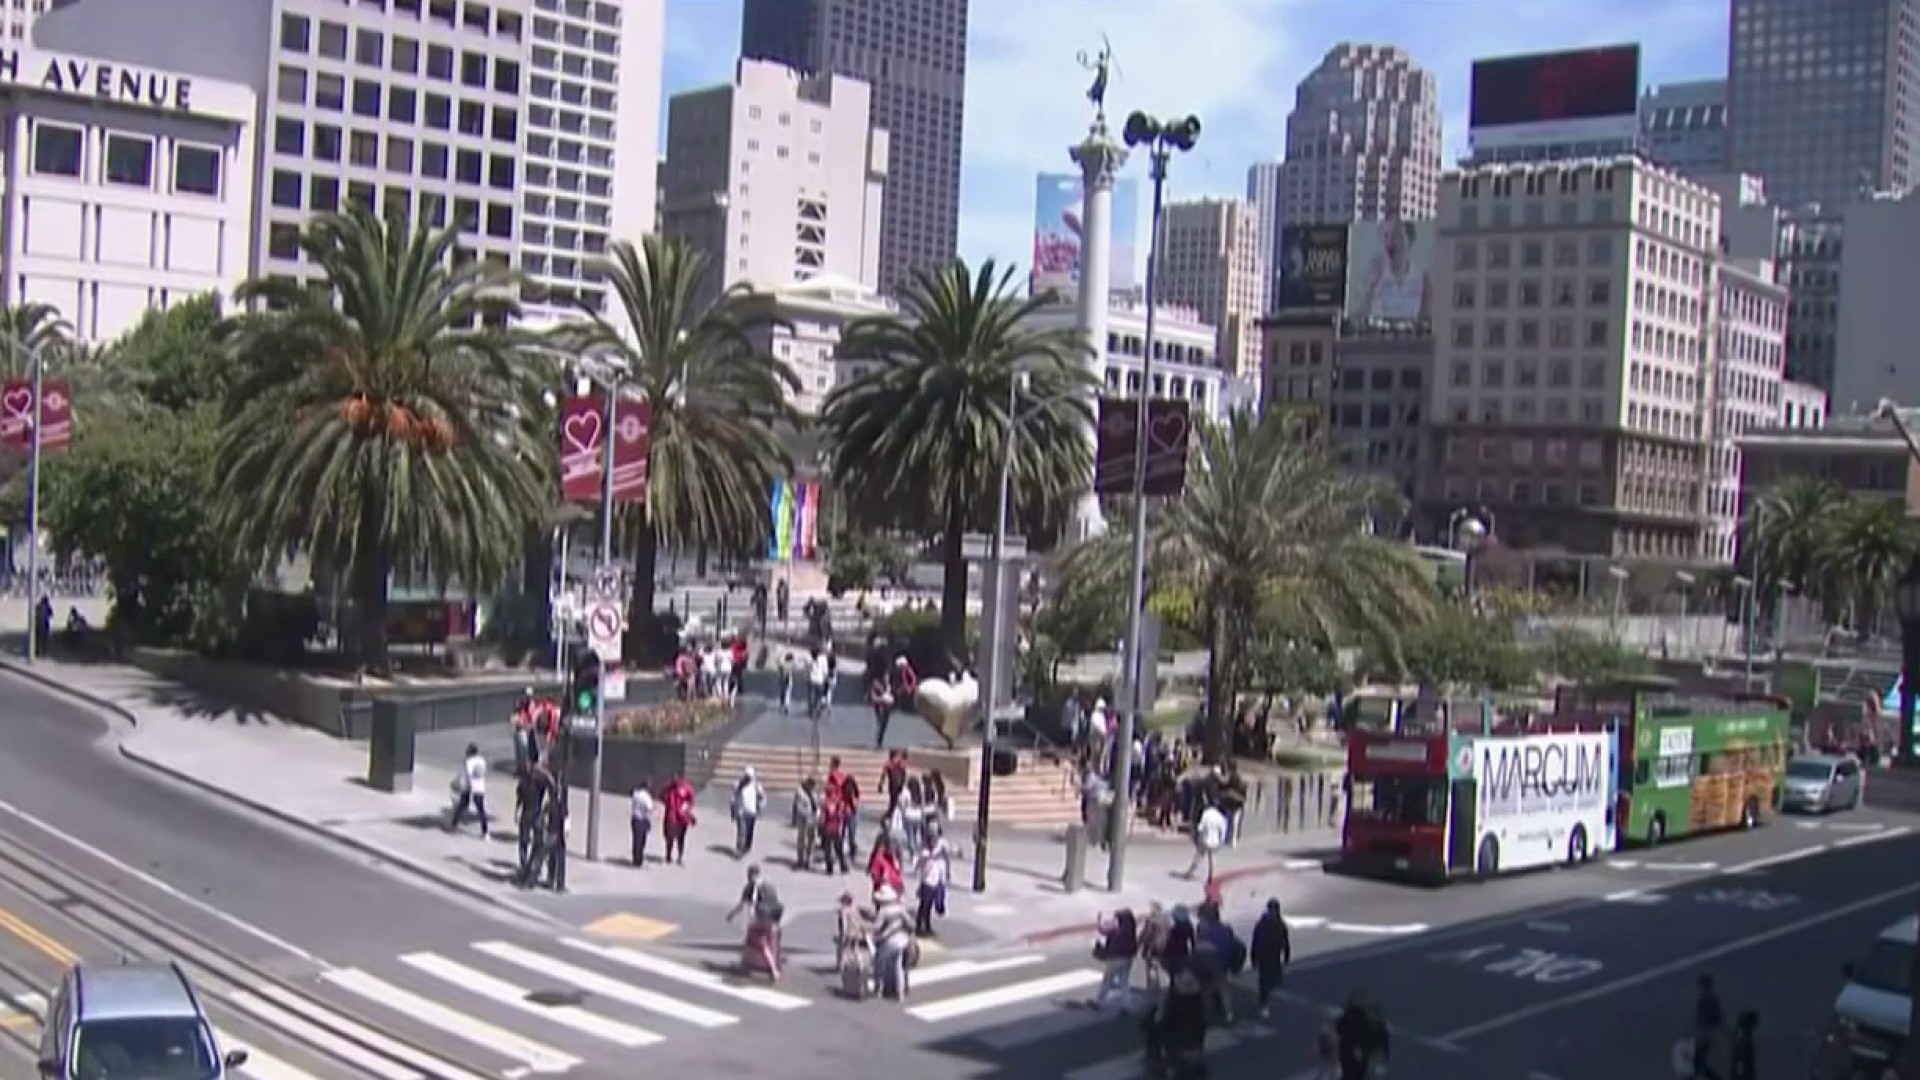 Union Square store is latest major retailer closing in downtown S.F.